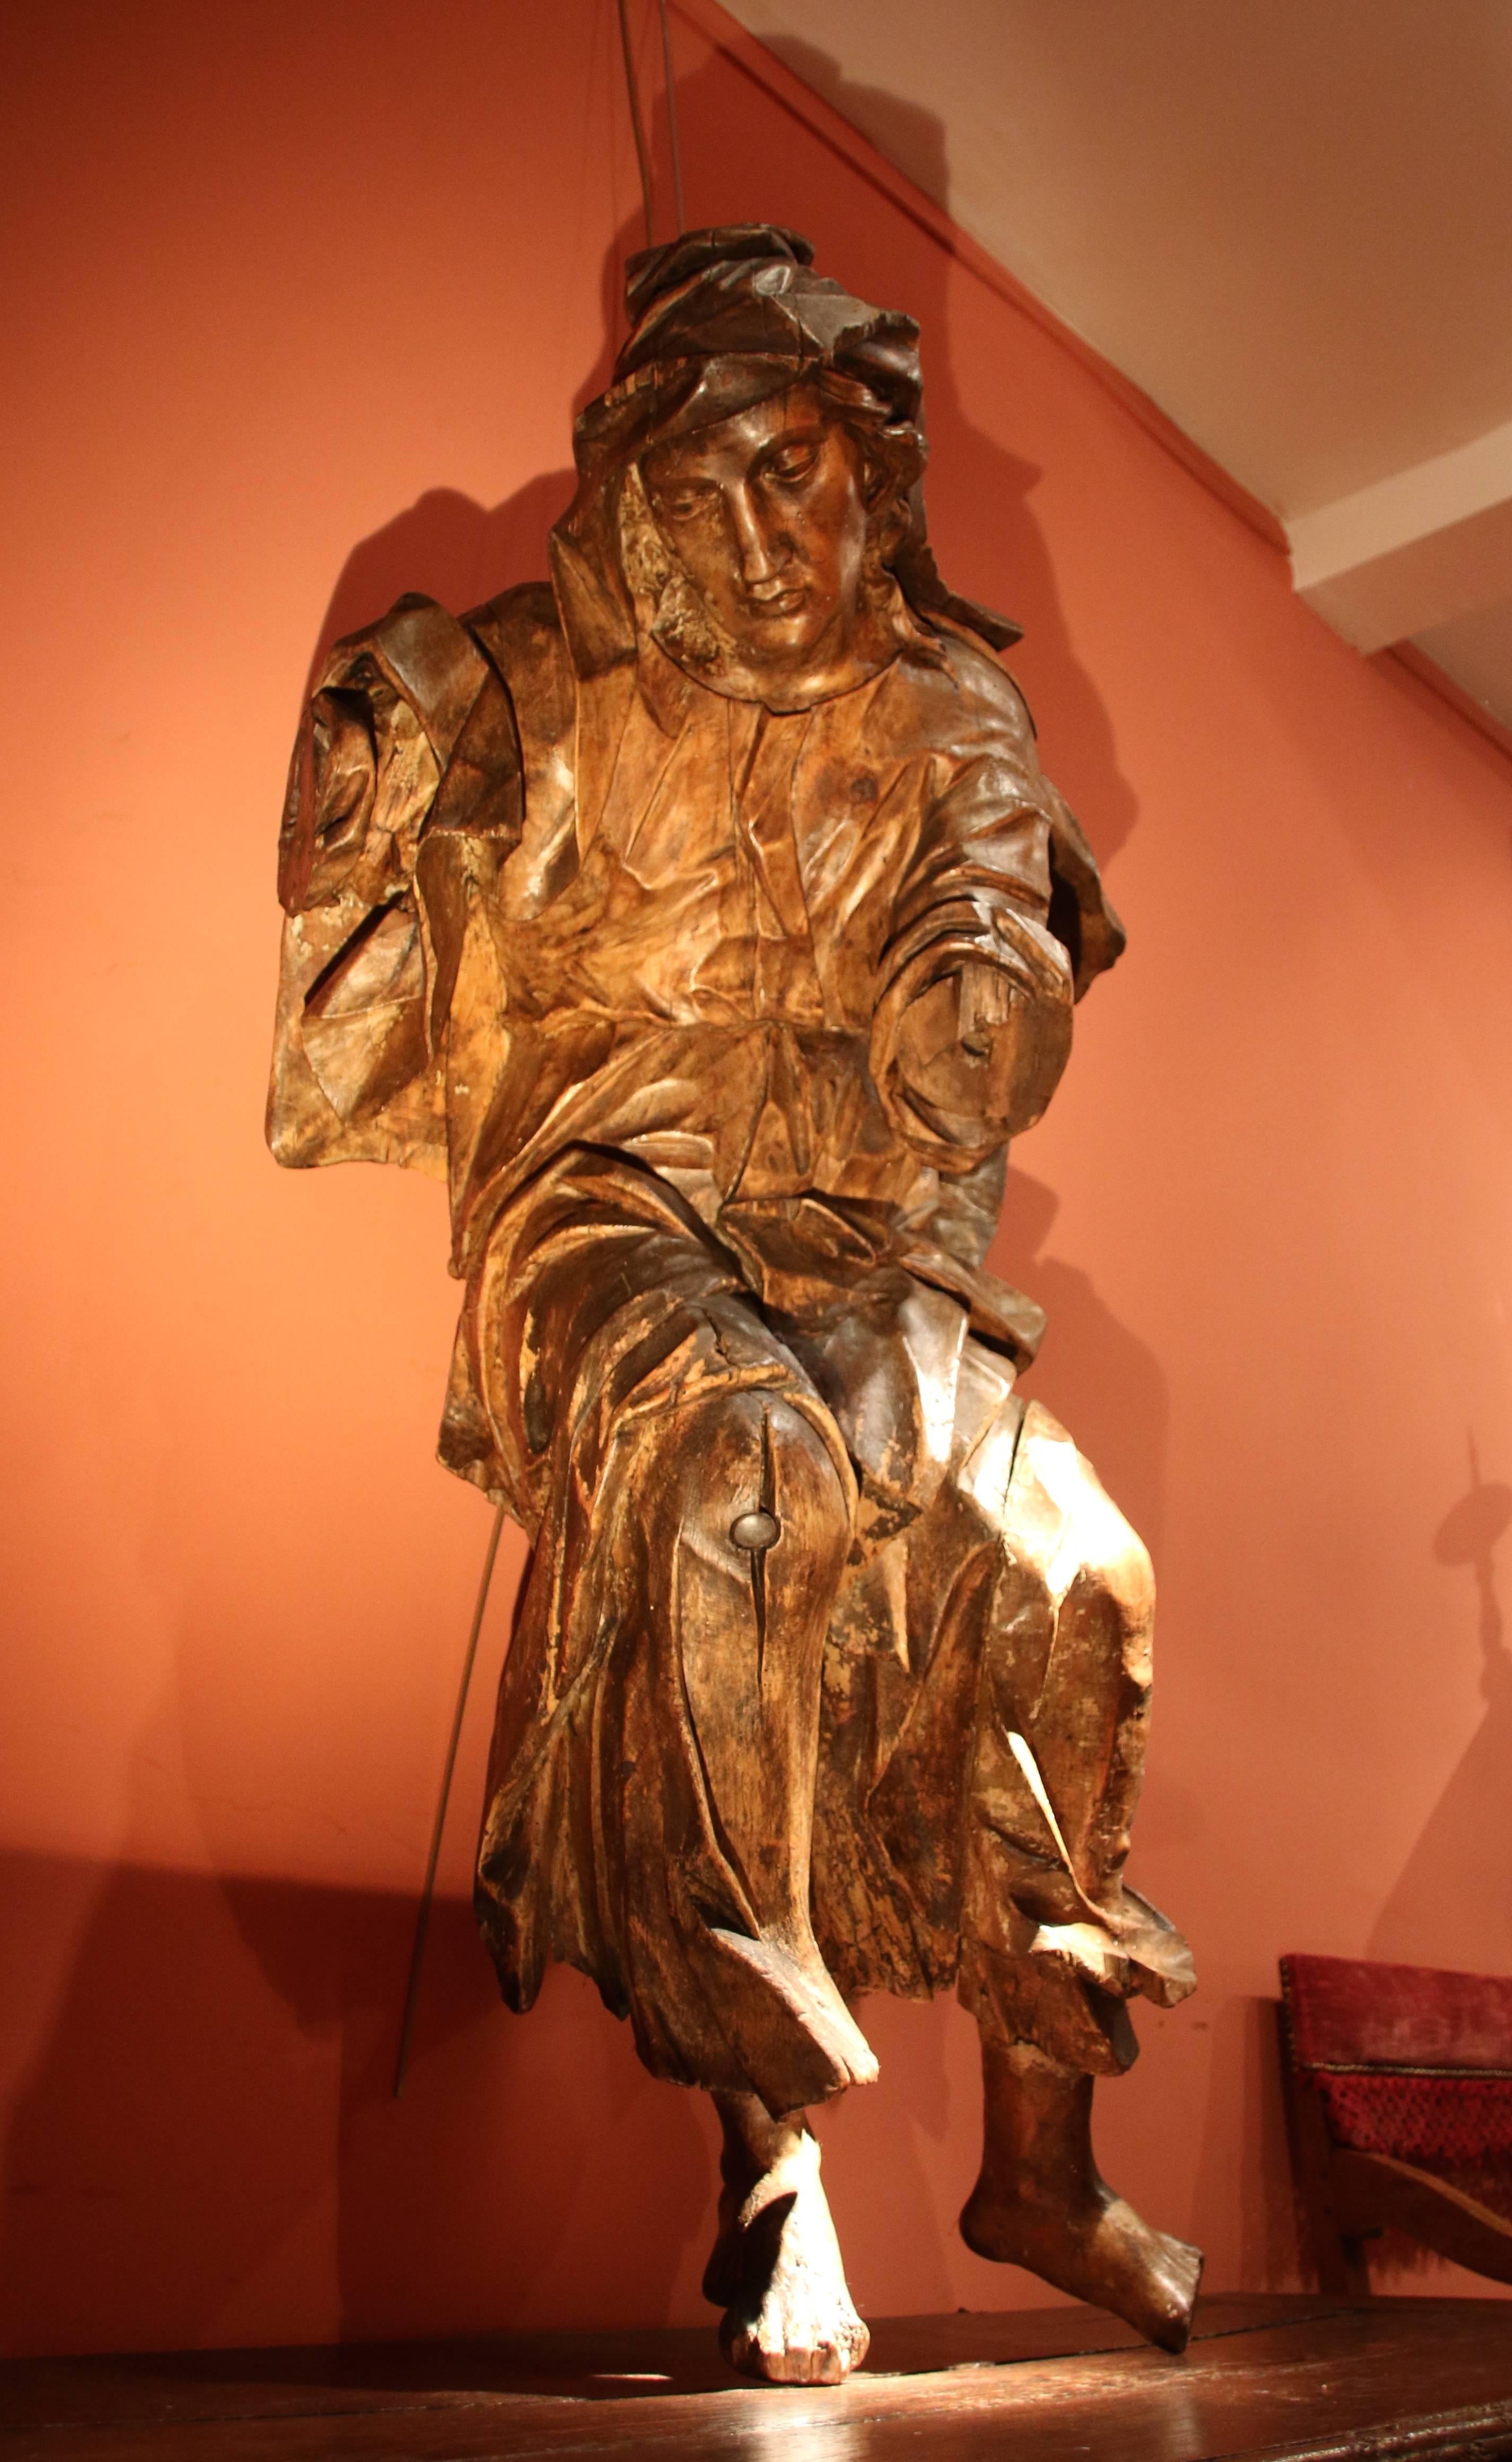 Origin: Southern Germany
Period: Late 15th – early 16th century
Limewood

This fine sculpture, whose folds and drapery’s work is quite remarkable playing with light and matter, may have been part of the ornamentation of a monumental organ-case.